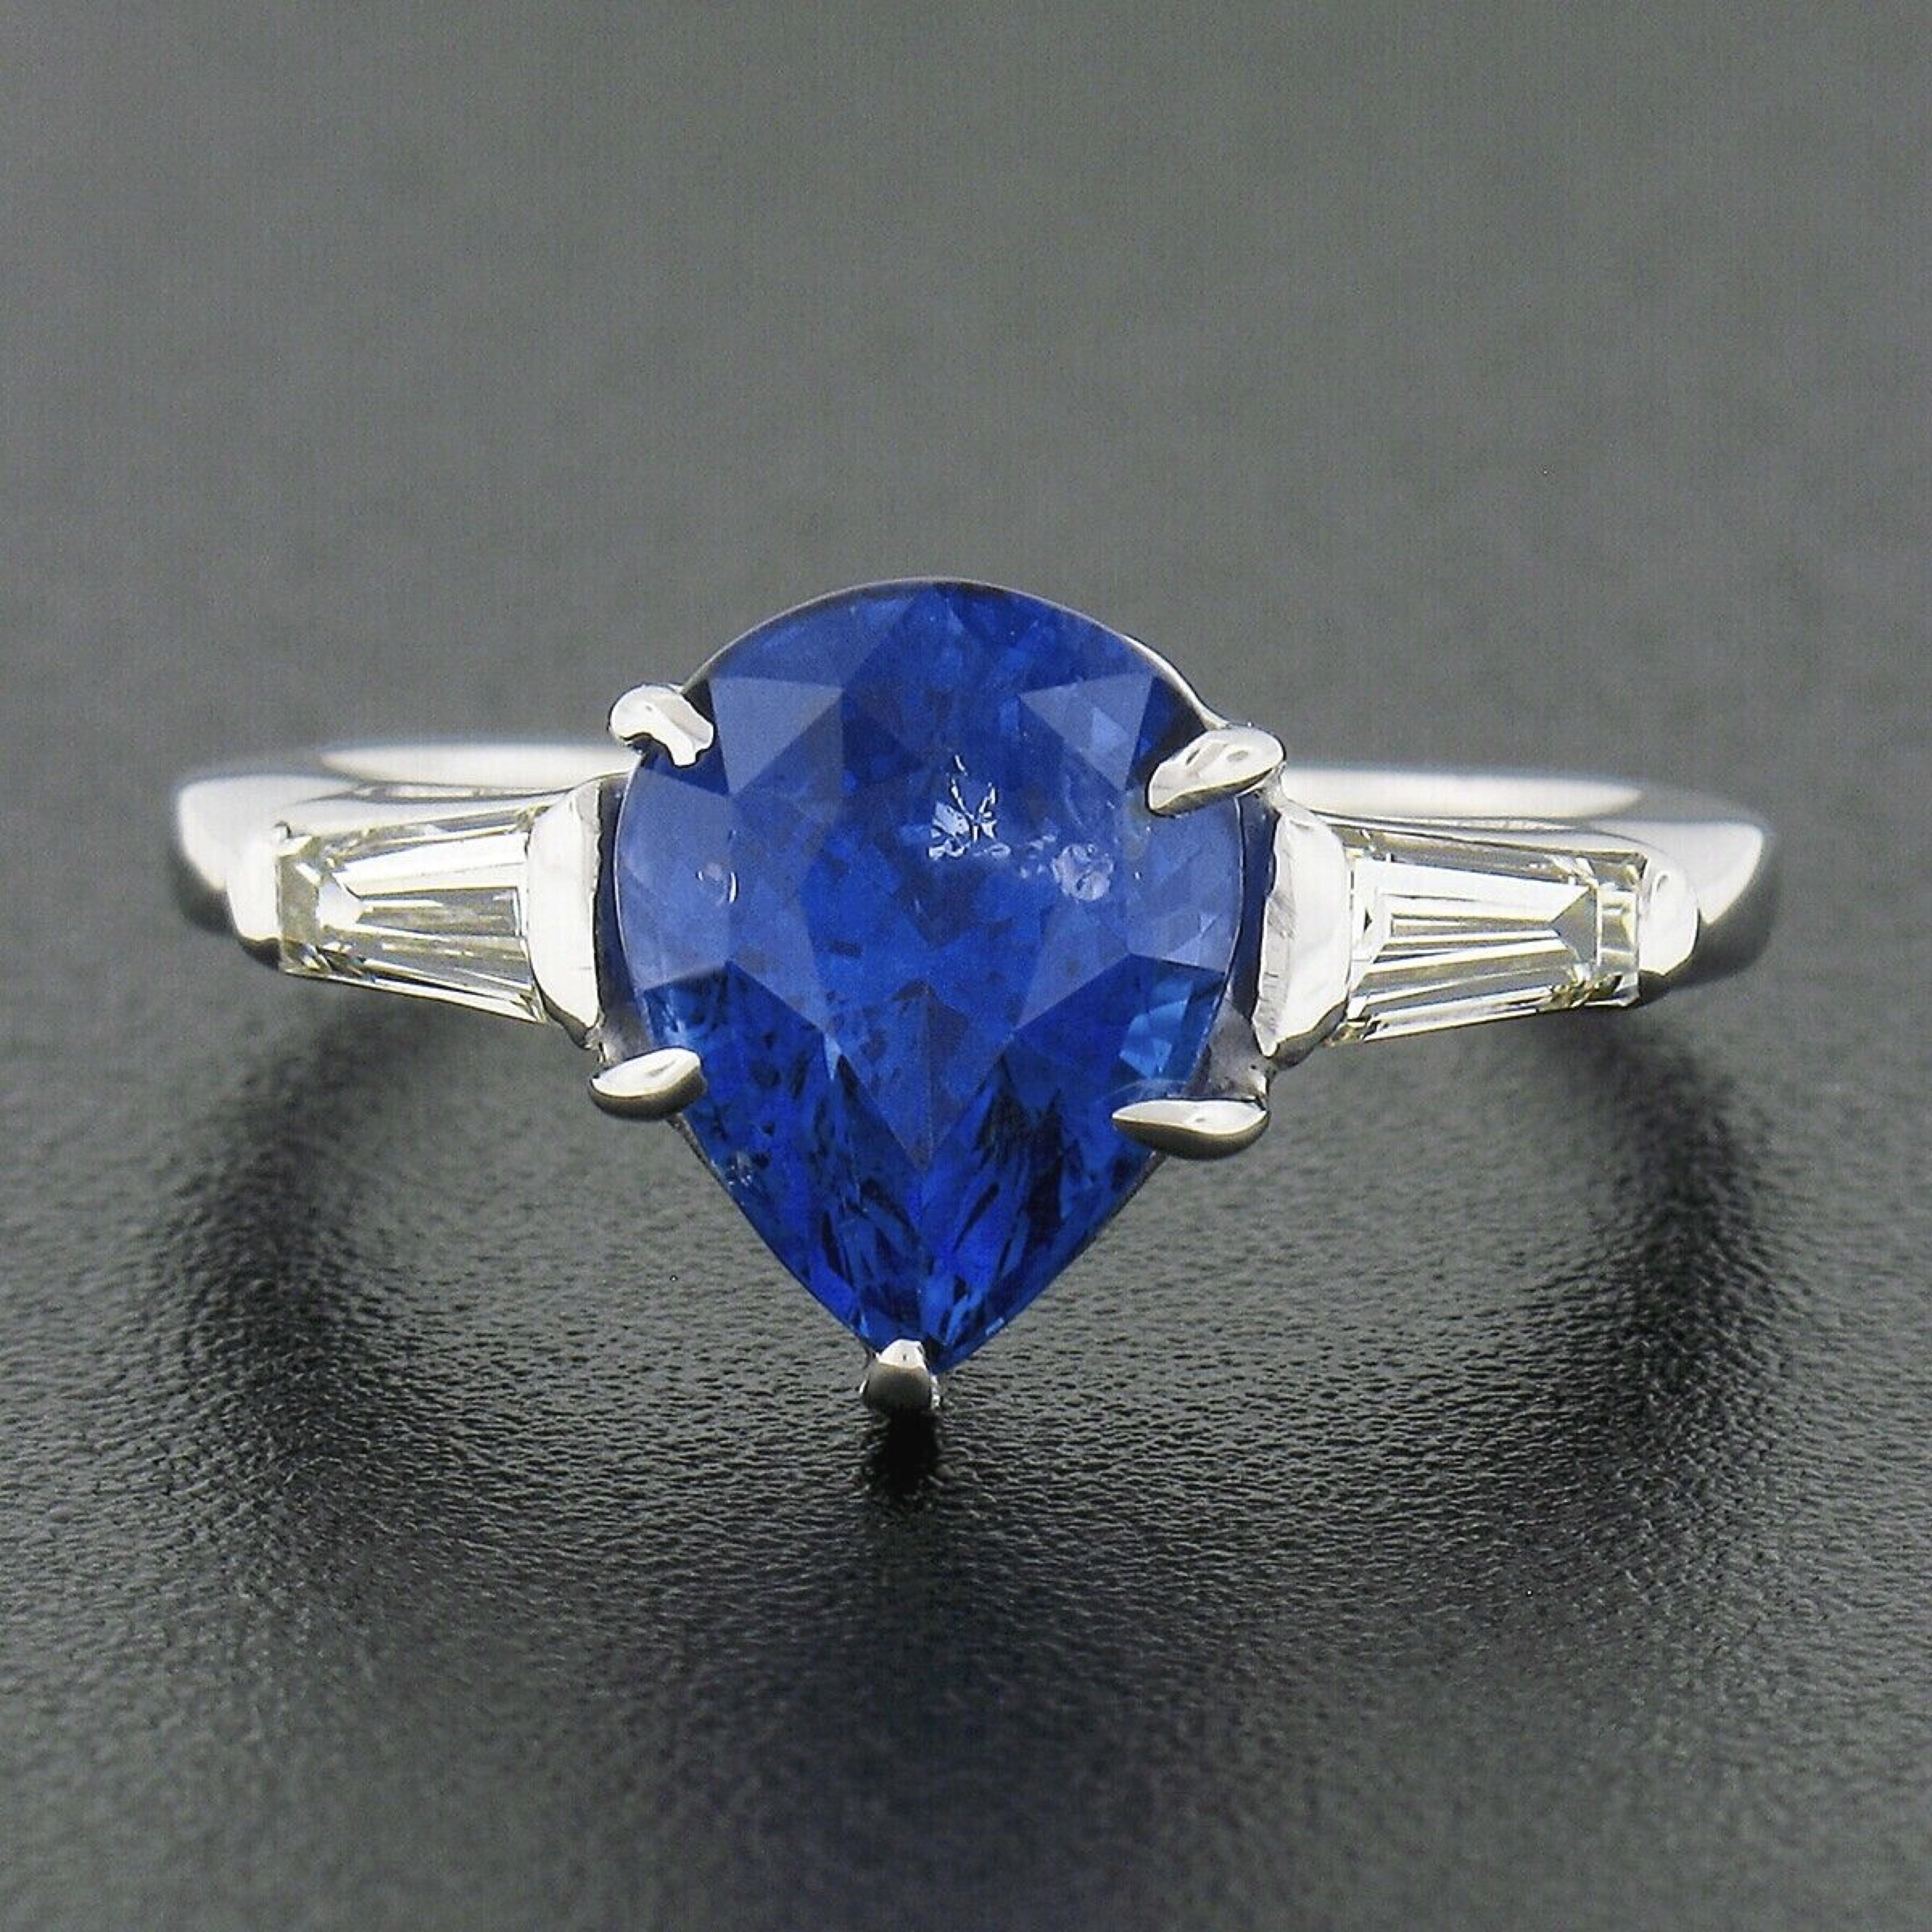 You are looking at a truly breathtaking sapphire and diamond three stone vintage ring that is crafted in solid platinum. The ring features a stunning, GIA certified, pear brilliant cut sapphire solitaire neatly prong set in the center basket and is